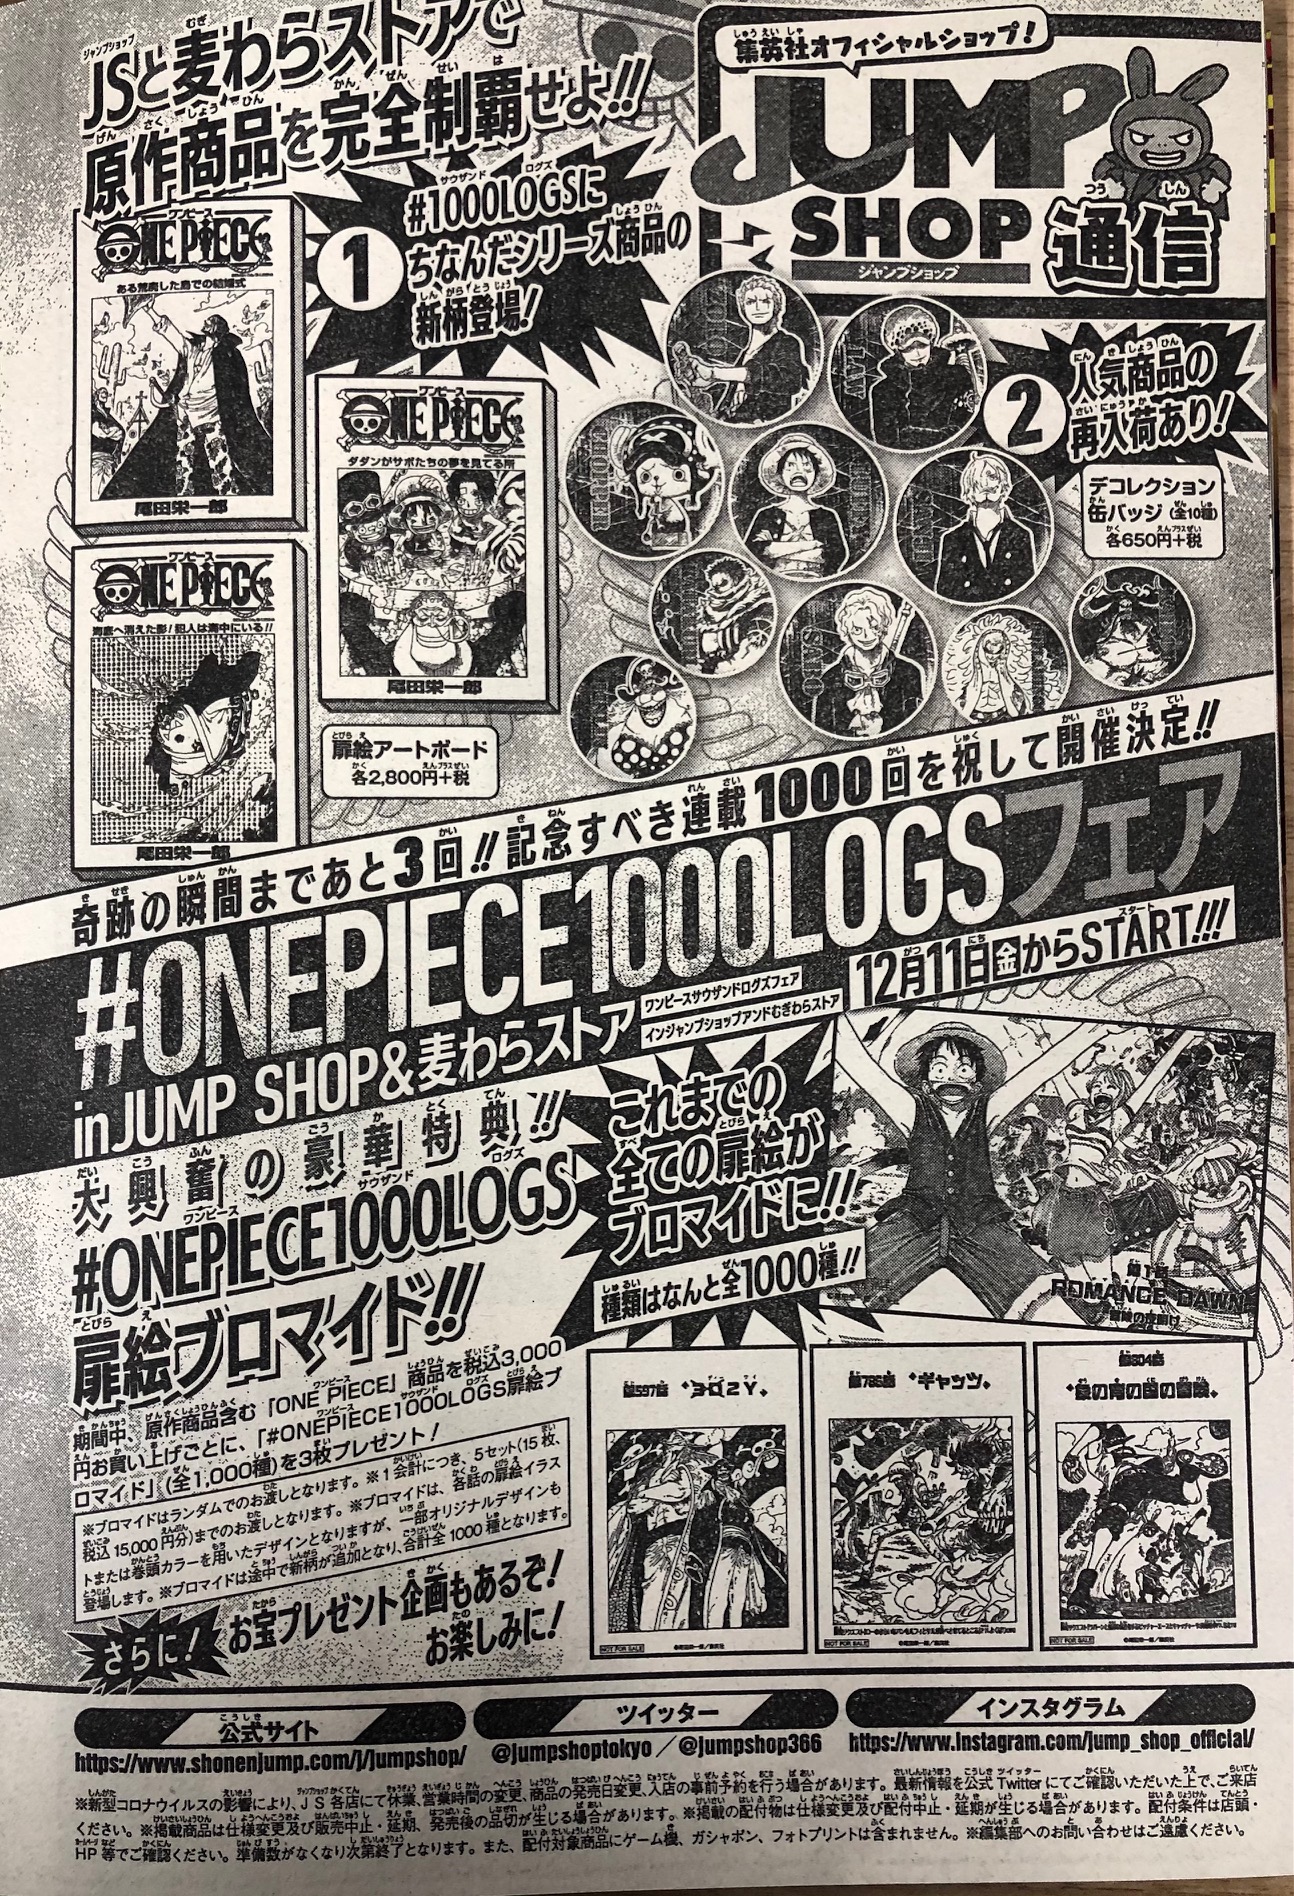 50 Off ワンピース 874話 扉絵ブロマイド Onepiece キャラクターグッズ Guiacieneguilla Com